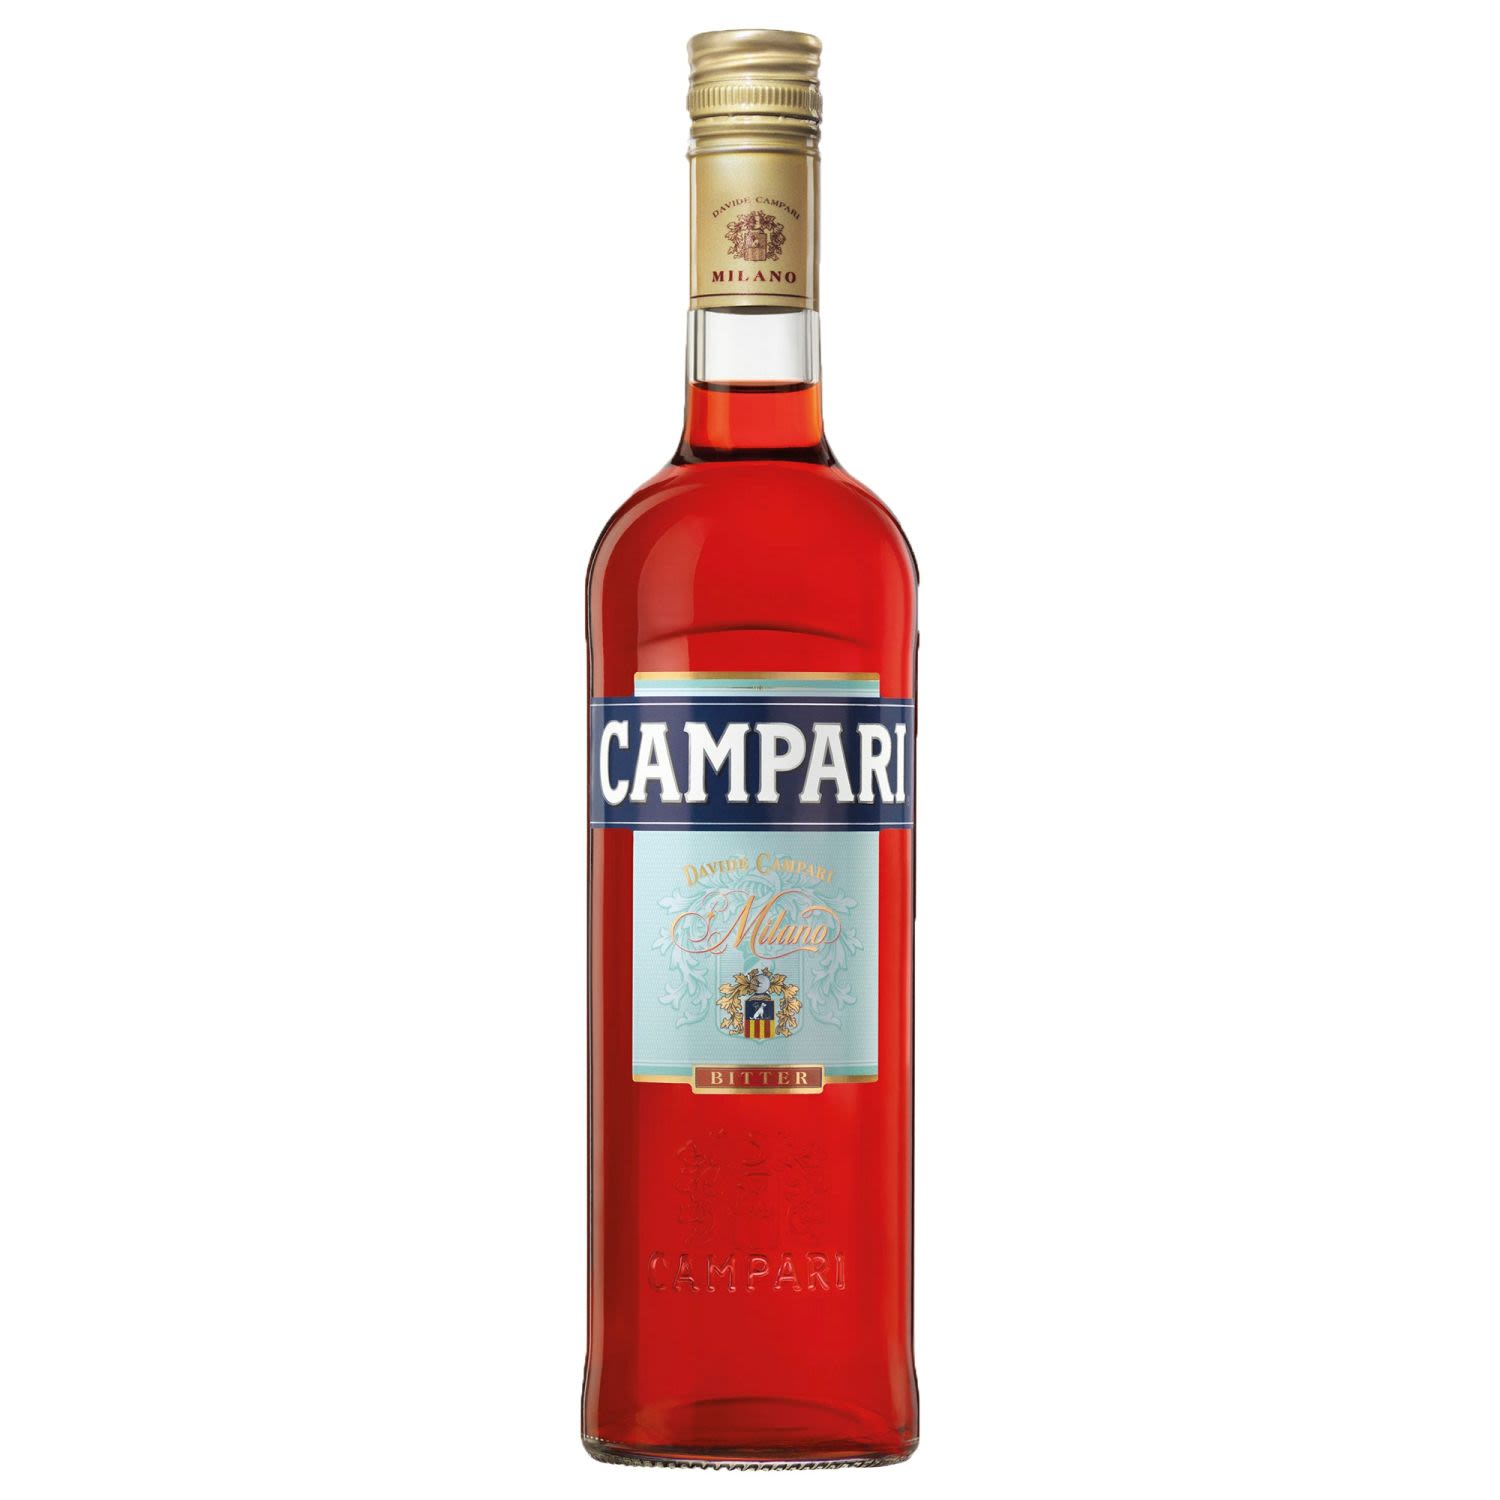 Campari is the perfect aperitif with its distinctive red colour, aroma and pleasantly bittersweet flavour. Enjoy Campari mixed with orange juice, grapefruit juice or soda over ice or in an Americano or Italian Mojito cocktail.<br /> <br />Alcohol Volume: 25.00%<br /><br />Pack Format: Bottle<br /><br />Standard Drinks: 14</br /><br />Pack Type: Bottle<br /><br />Country of Origin: Italy<br />